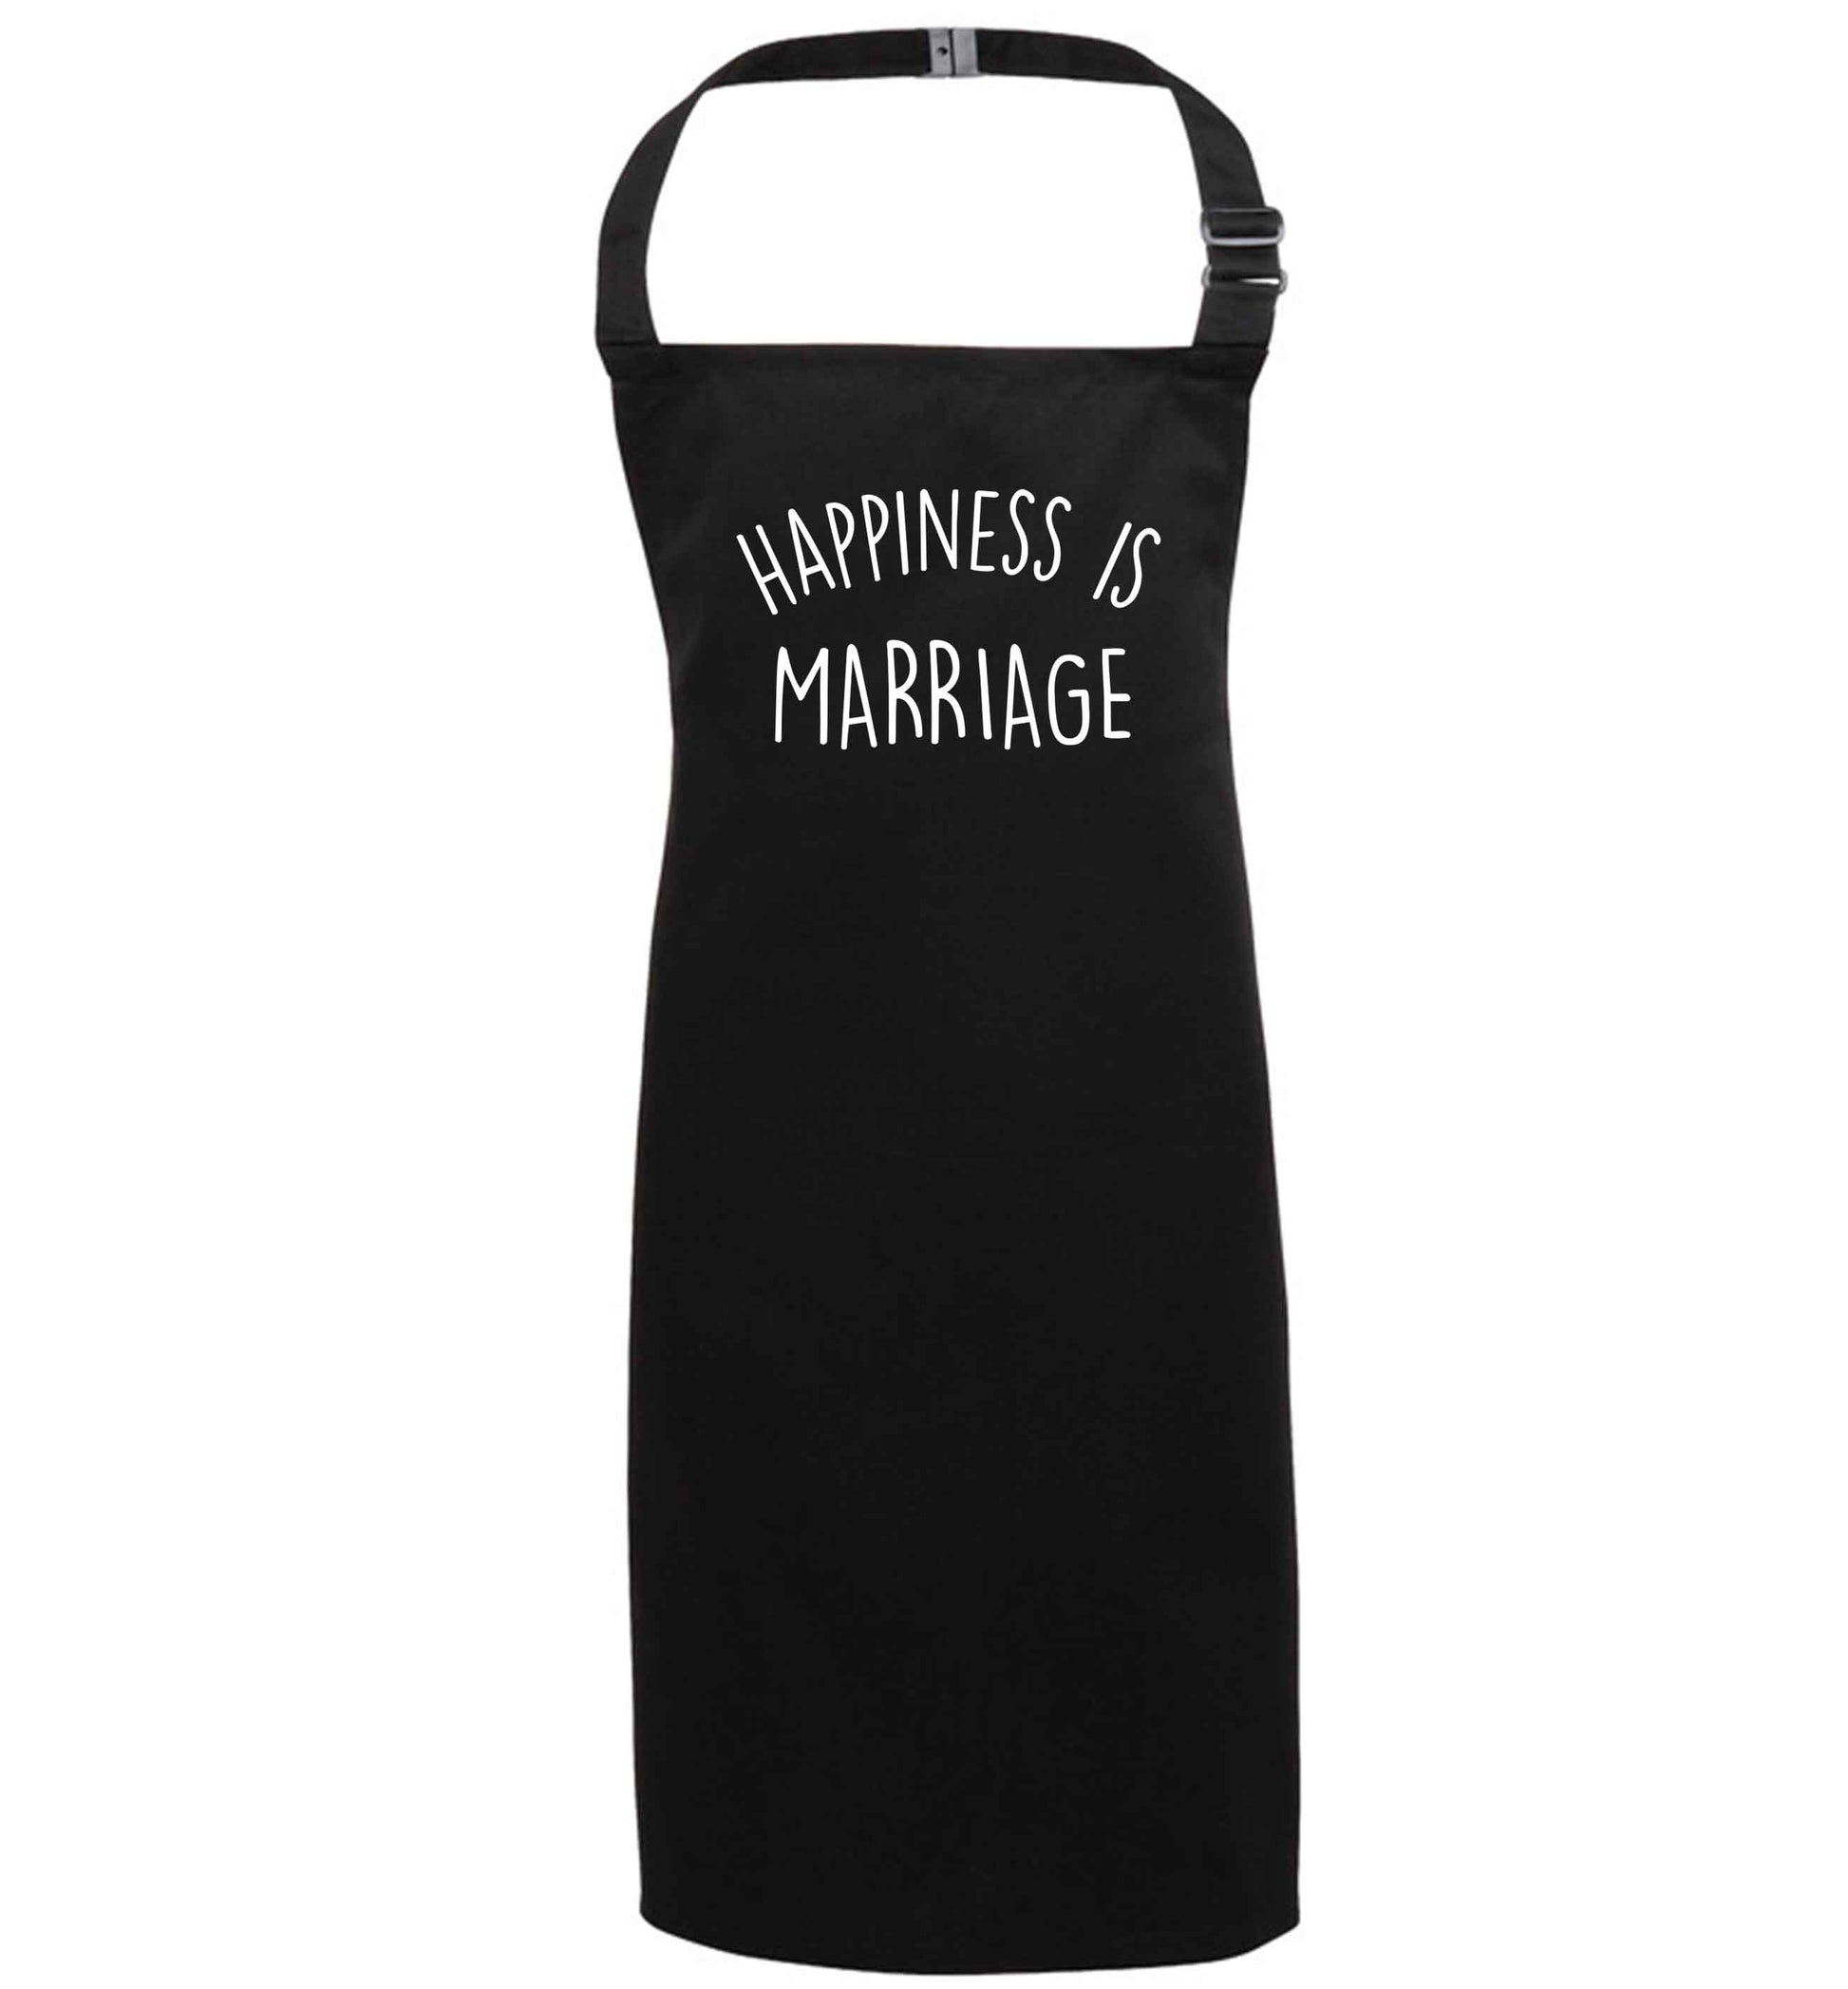 Happiness is marriage black apron 7-10 years